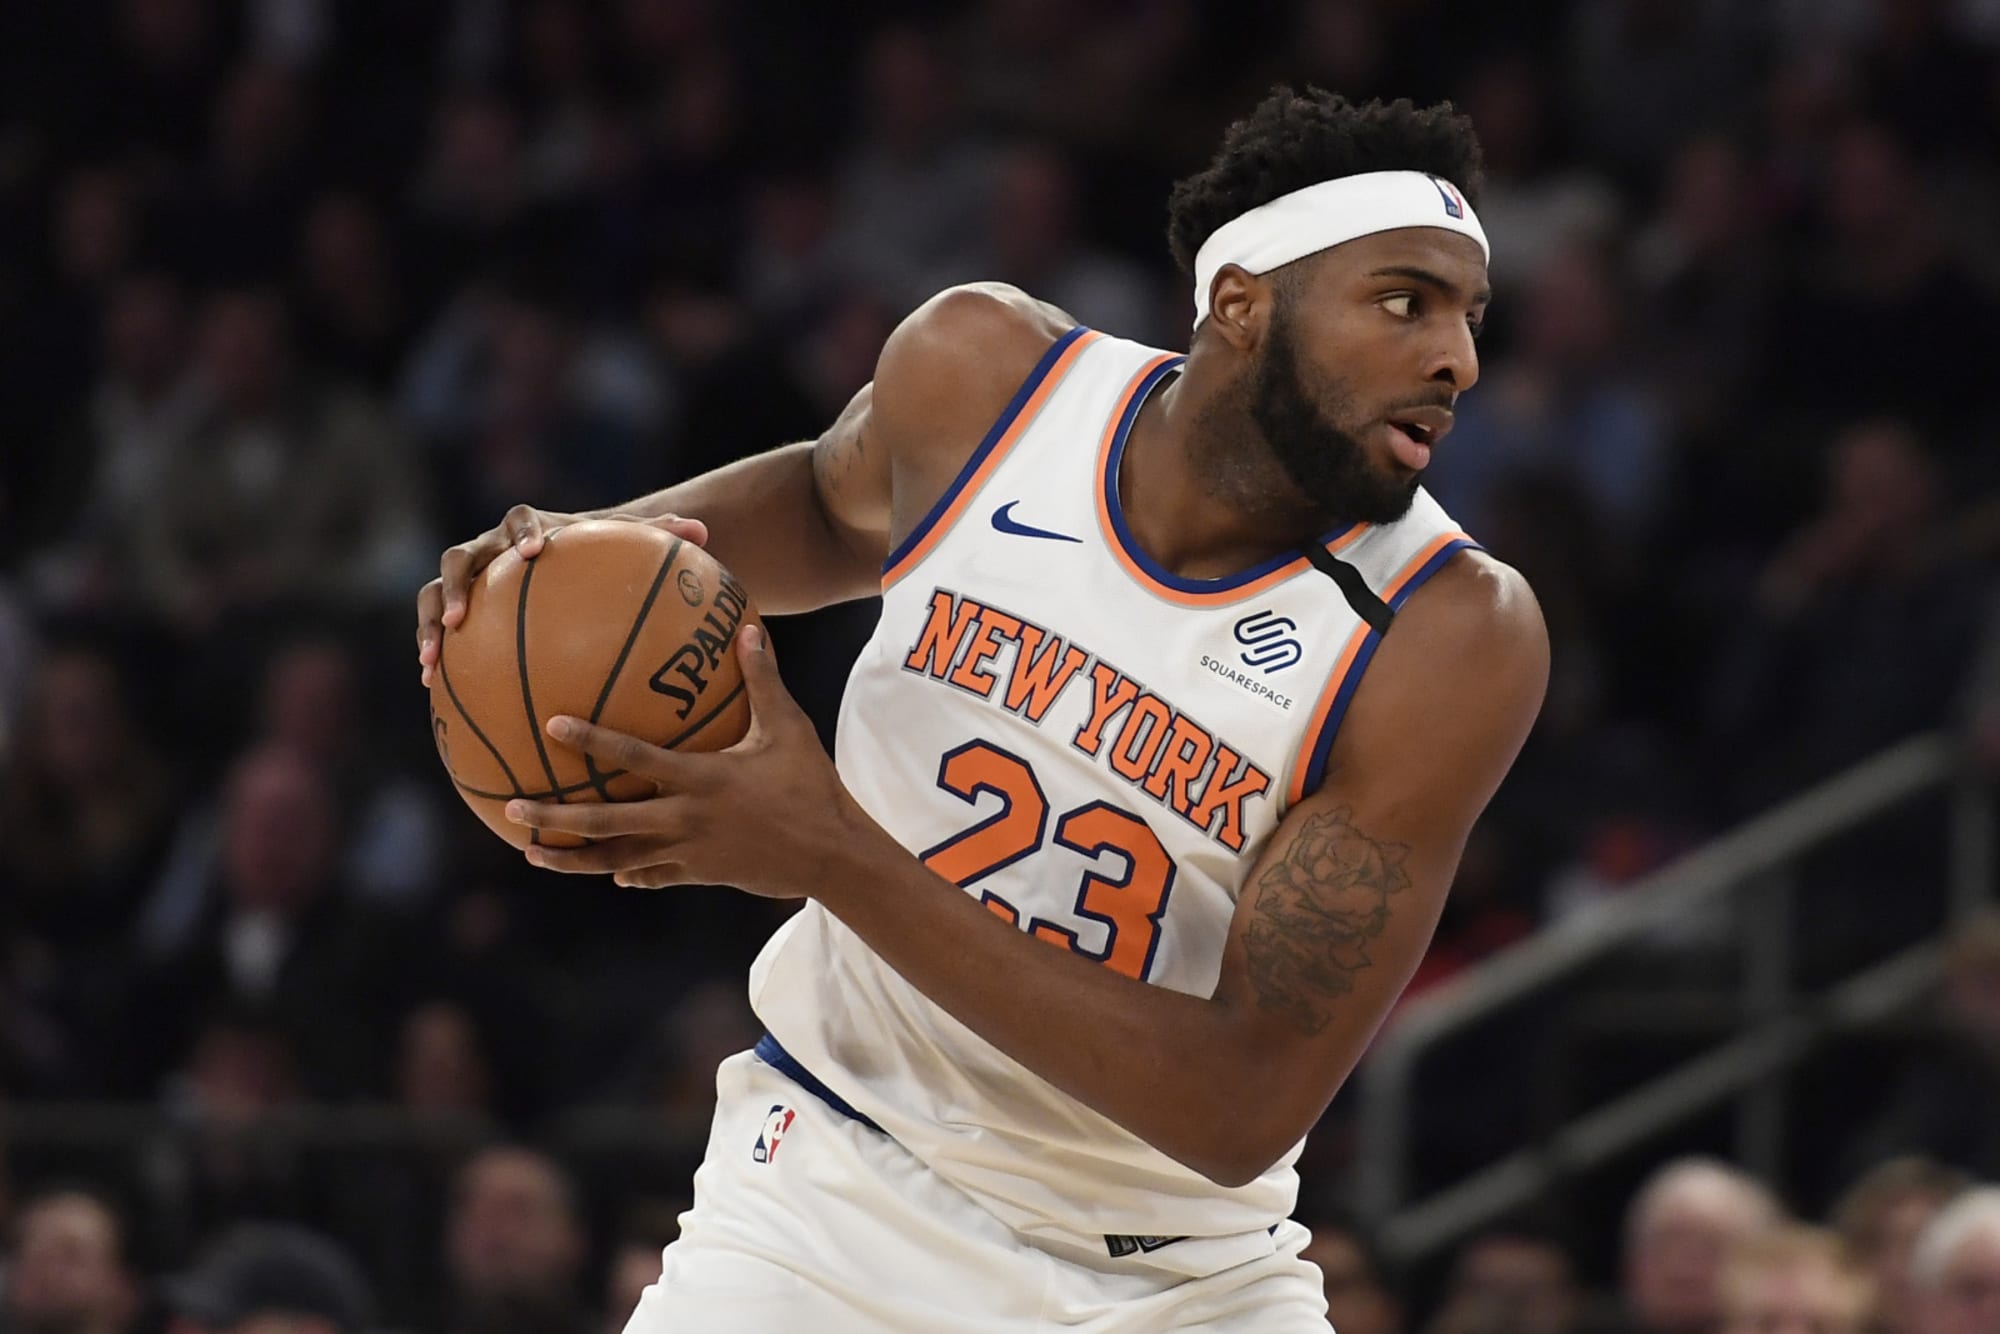 Mitchell Robinson - Knicks Sticker for Sale by On Target Sports